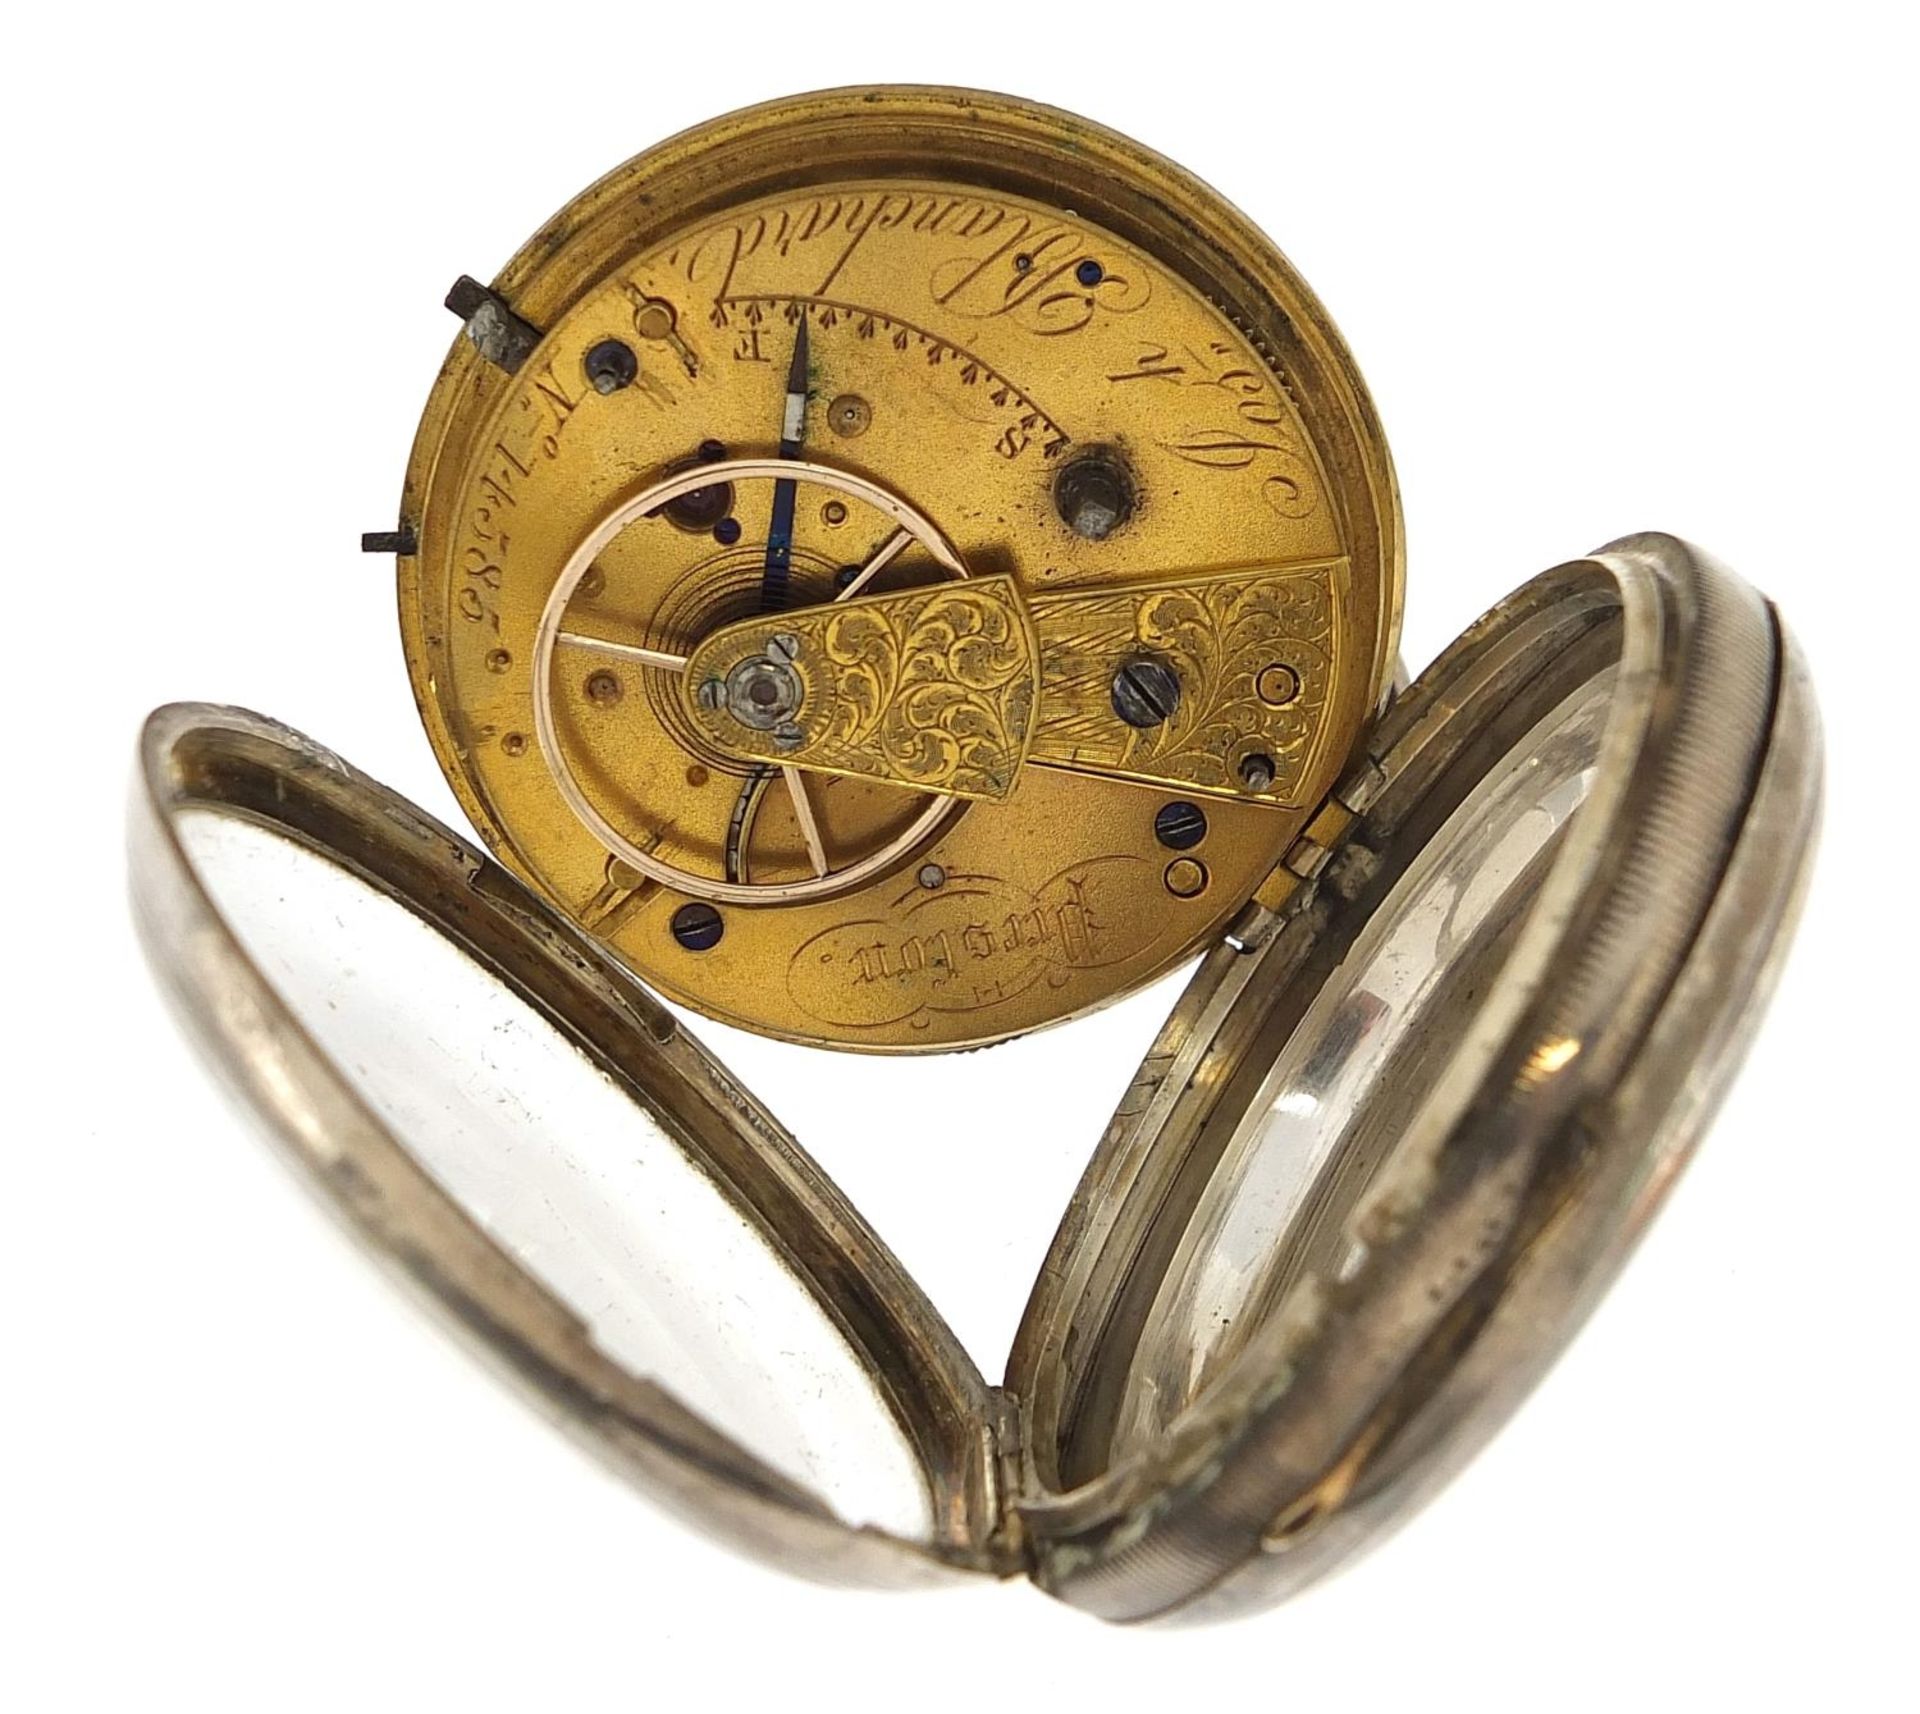 Joseph Blanchard, gentlemen's silver open face pocket watch, the fusee movement numbered 14585, 52mm - Image 3 of 4